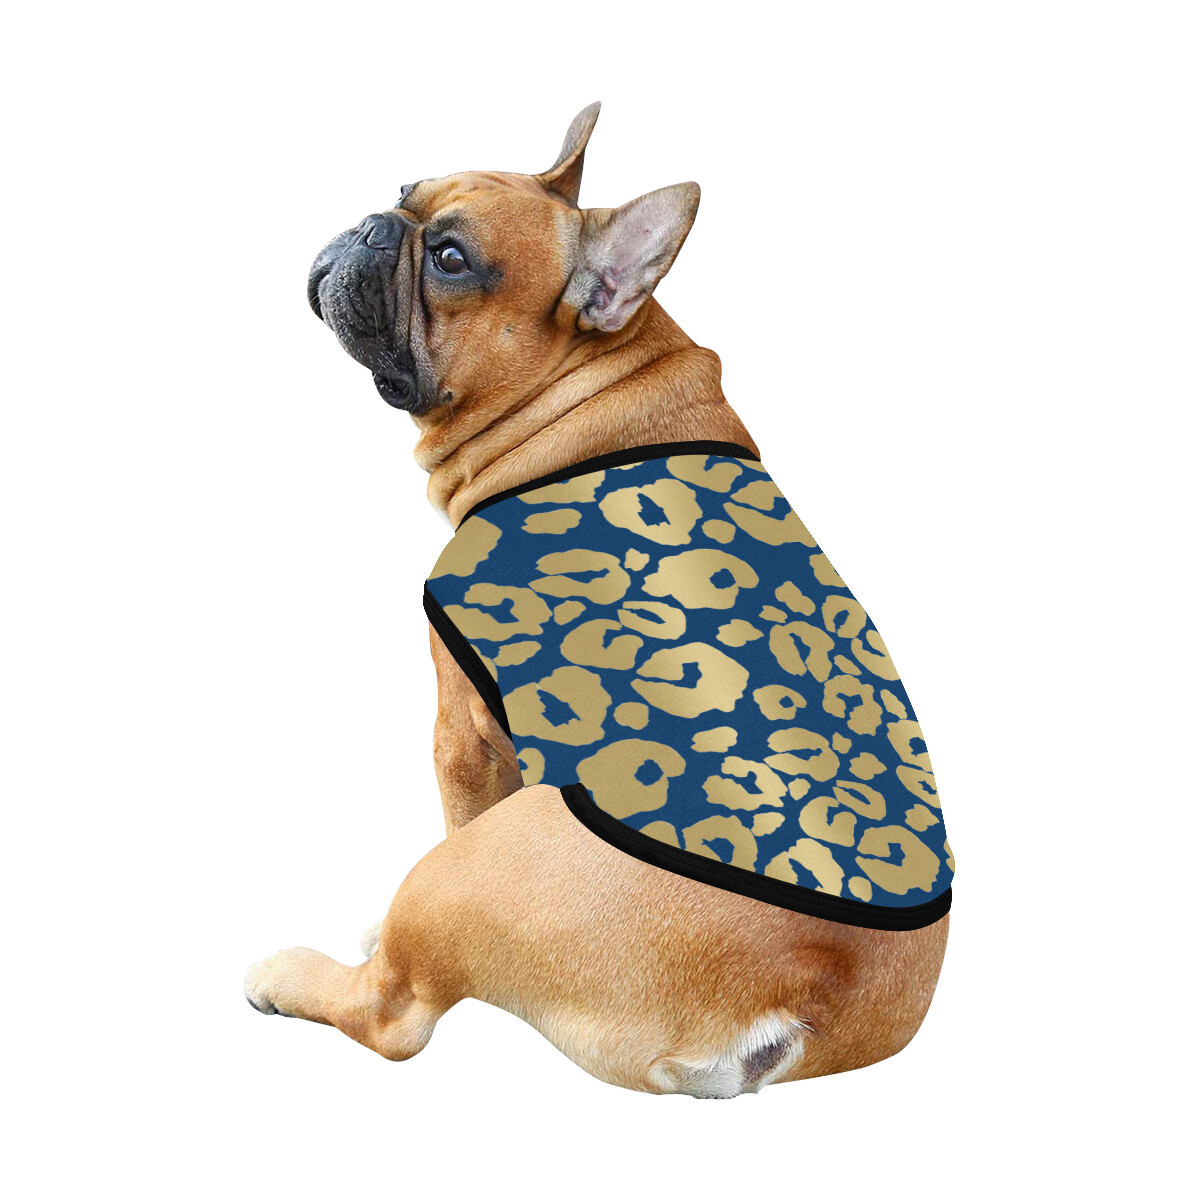 🐕 Leopard print Dog shirt, Dog Tank Top, Dog t-shirt, Dog clothes, Gifts, front back print, 7 sizes XS to 3XL, dog gifts, gold and navy blue